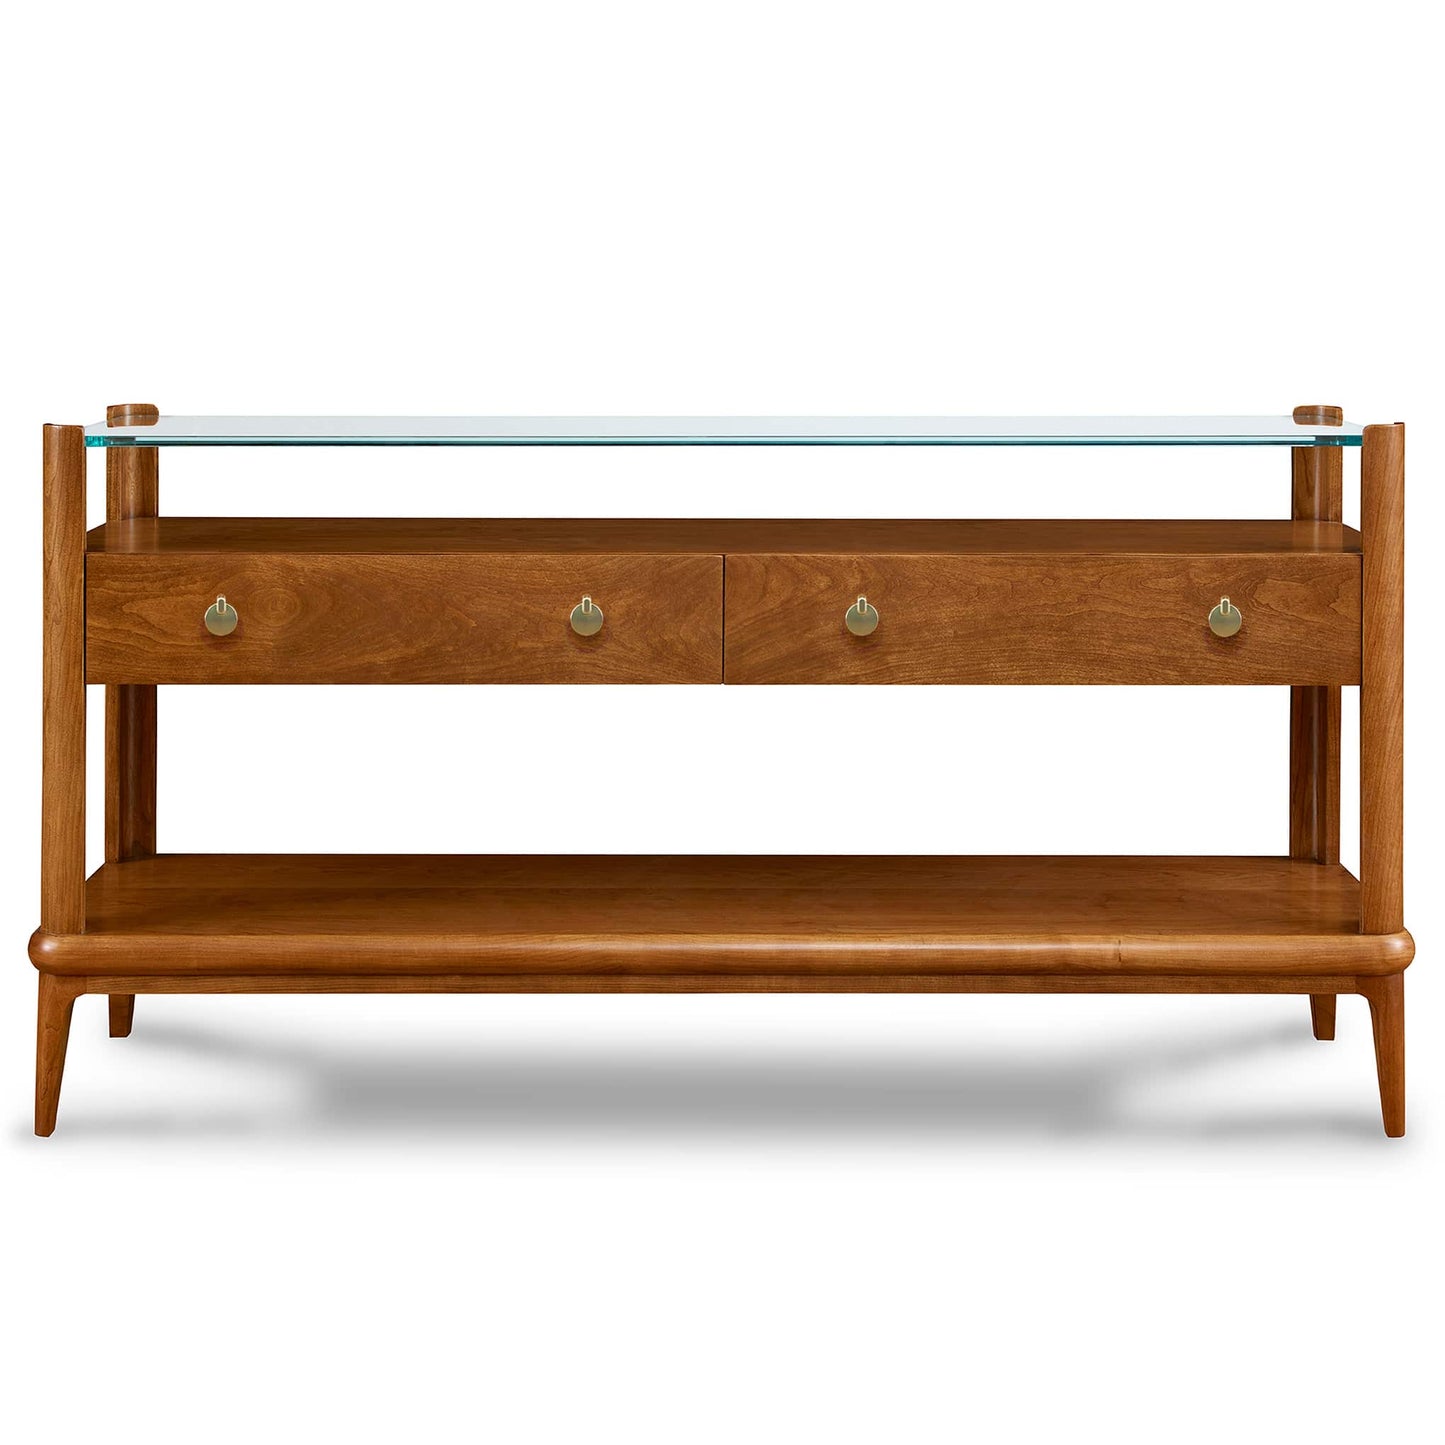 Martine Glass-Top Console Table - Stickley Brand